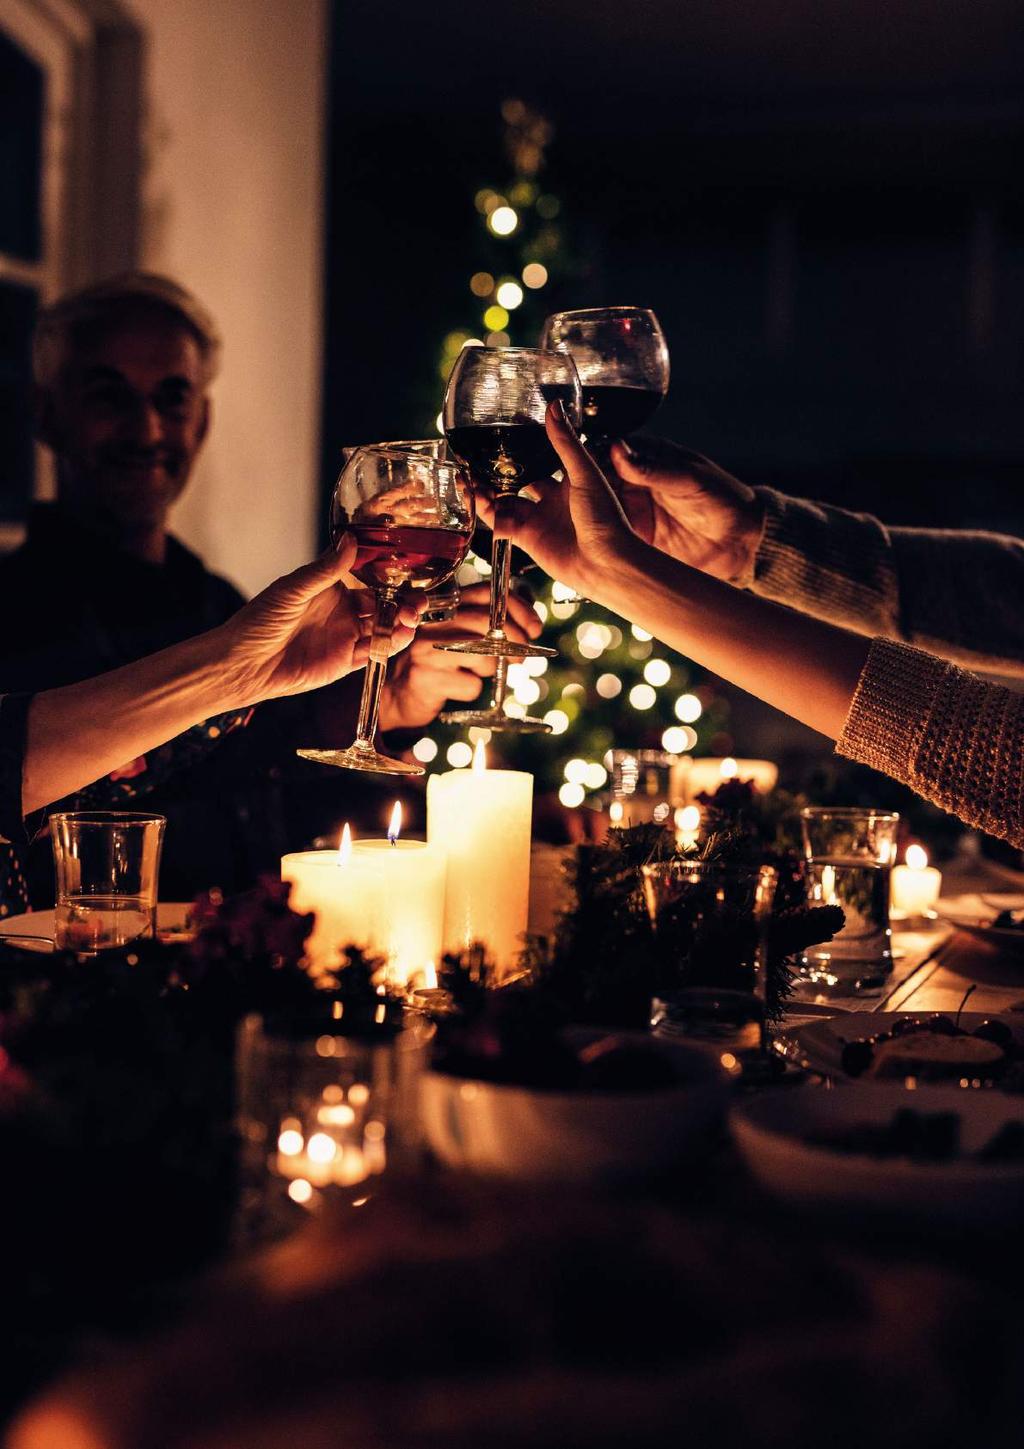 Contact our Christmas team Come together with Hilton Celebrate the festive season in style and party the night away with colleagues, friends and family at Hilton London Croydon.